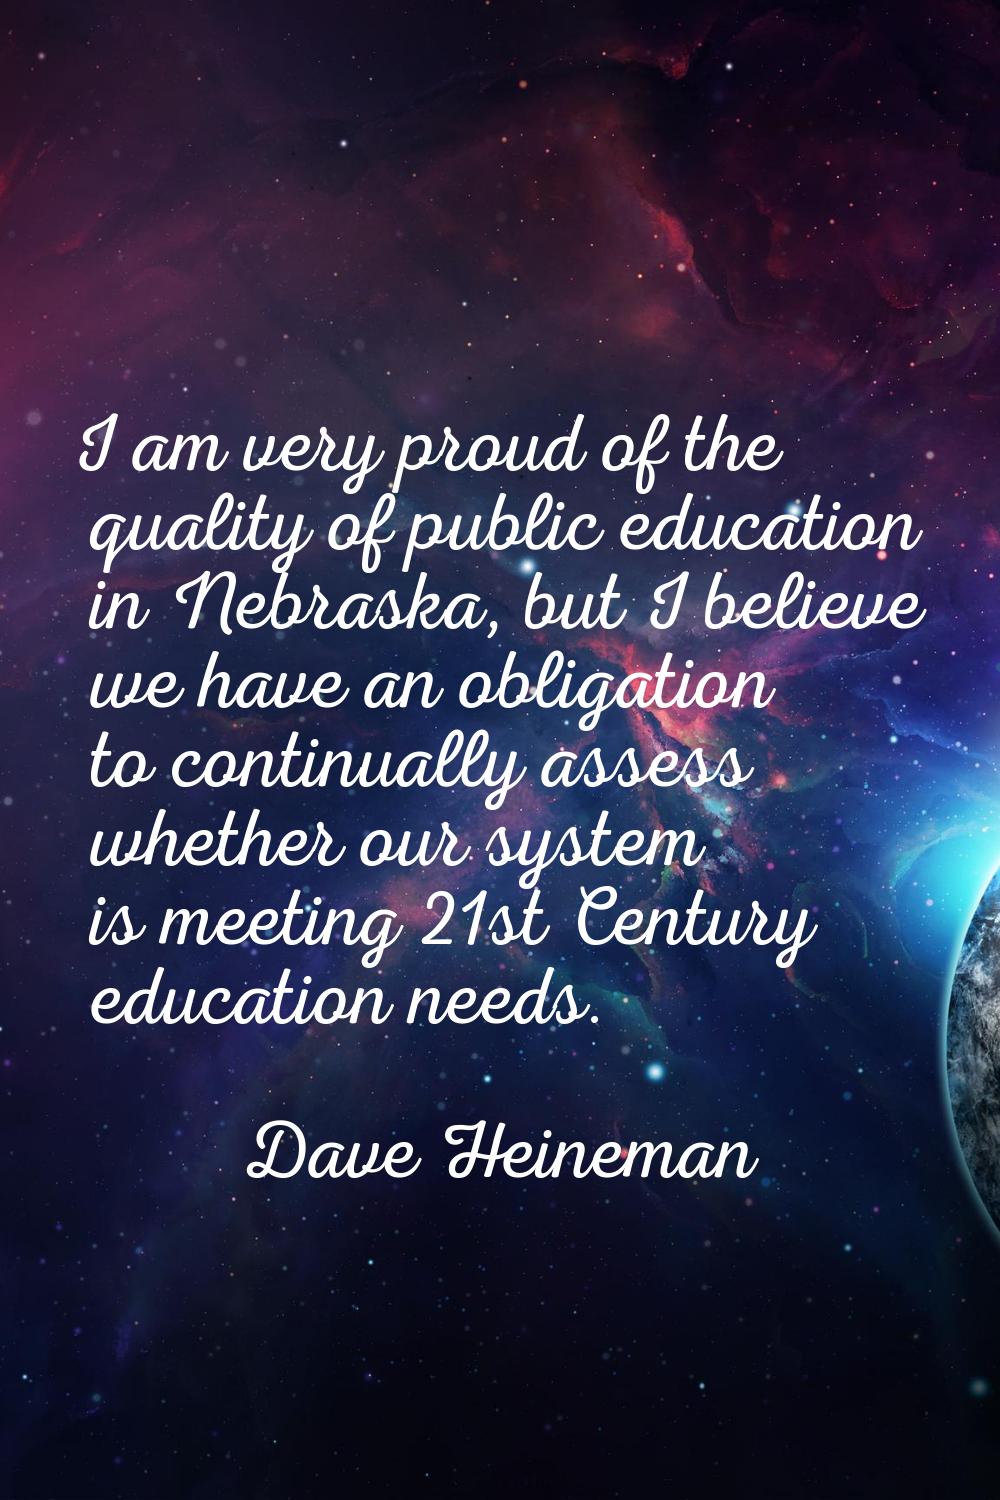 I am very proud of the quality of public education in Nebraska, but I believe we have an obligation